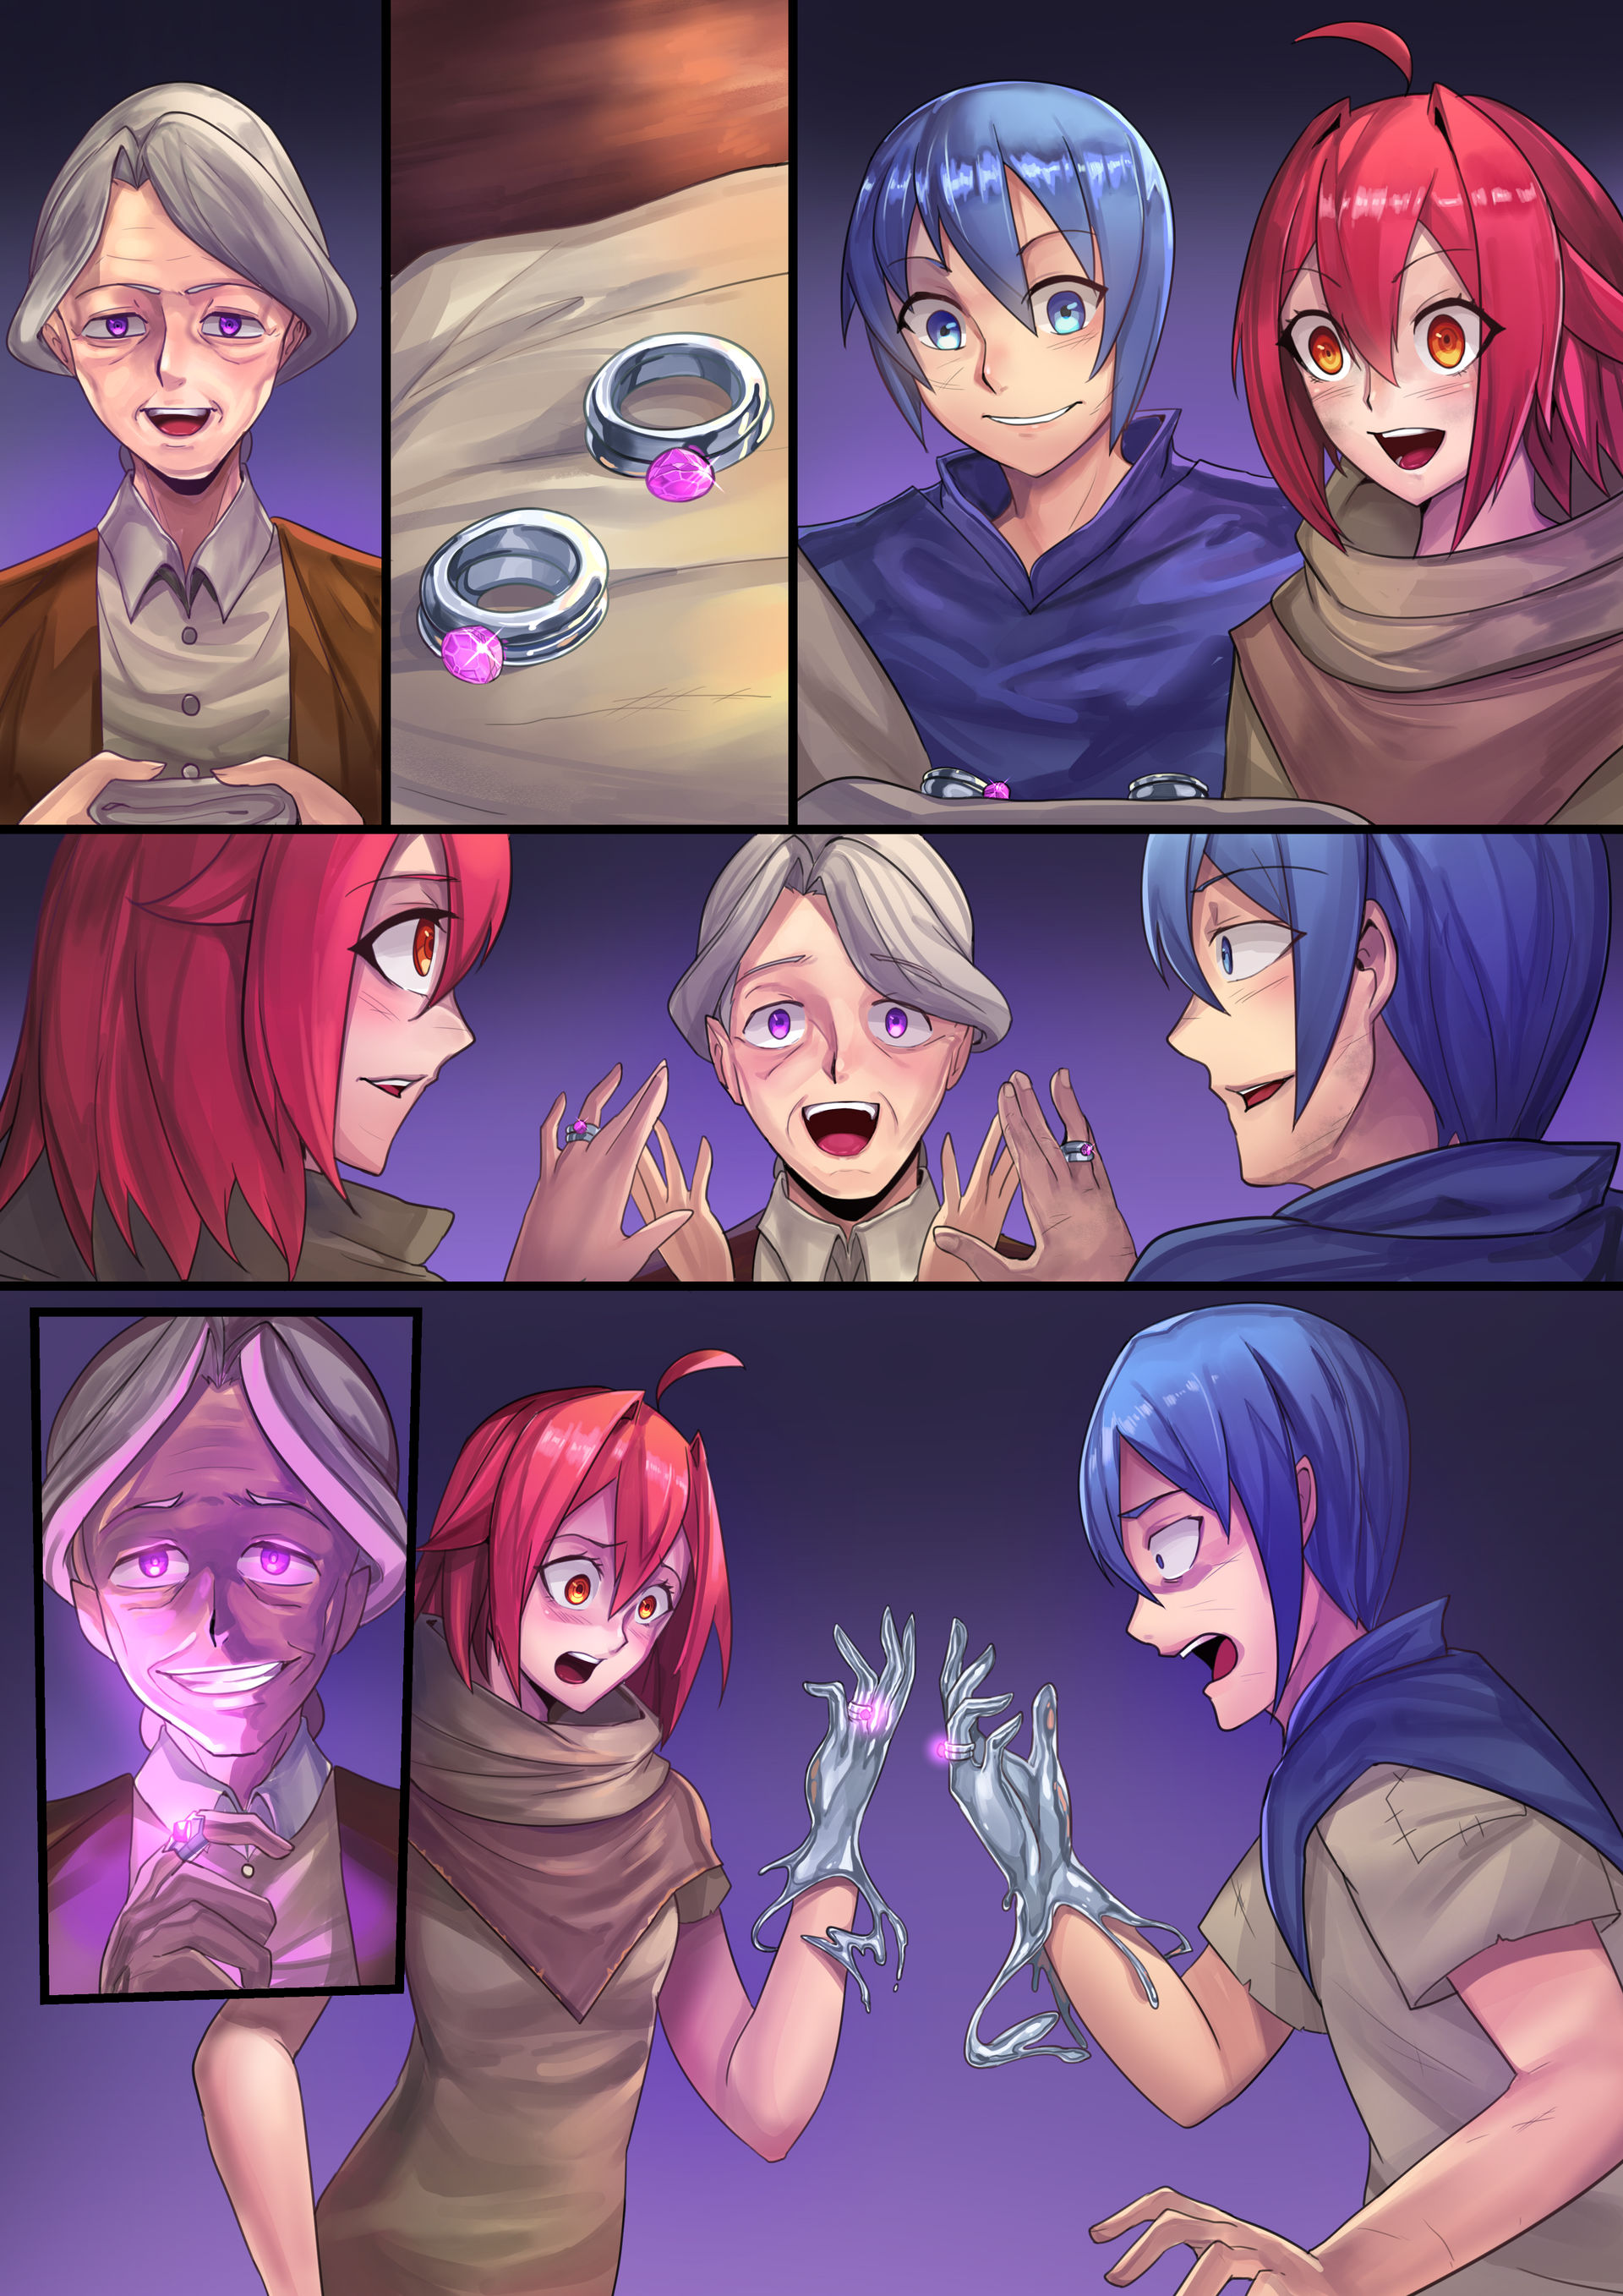 Ninja and the dark cult 2 page 2 by ibenz009 on DeviantArt